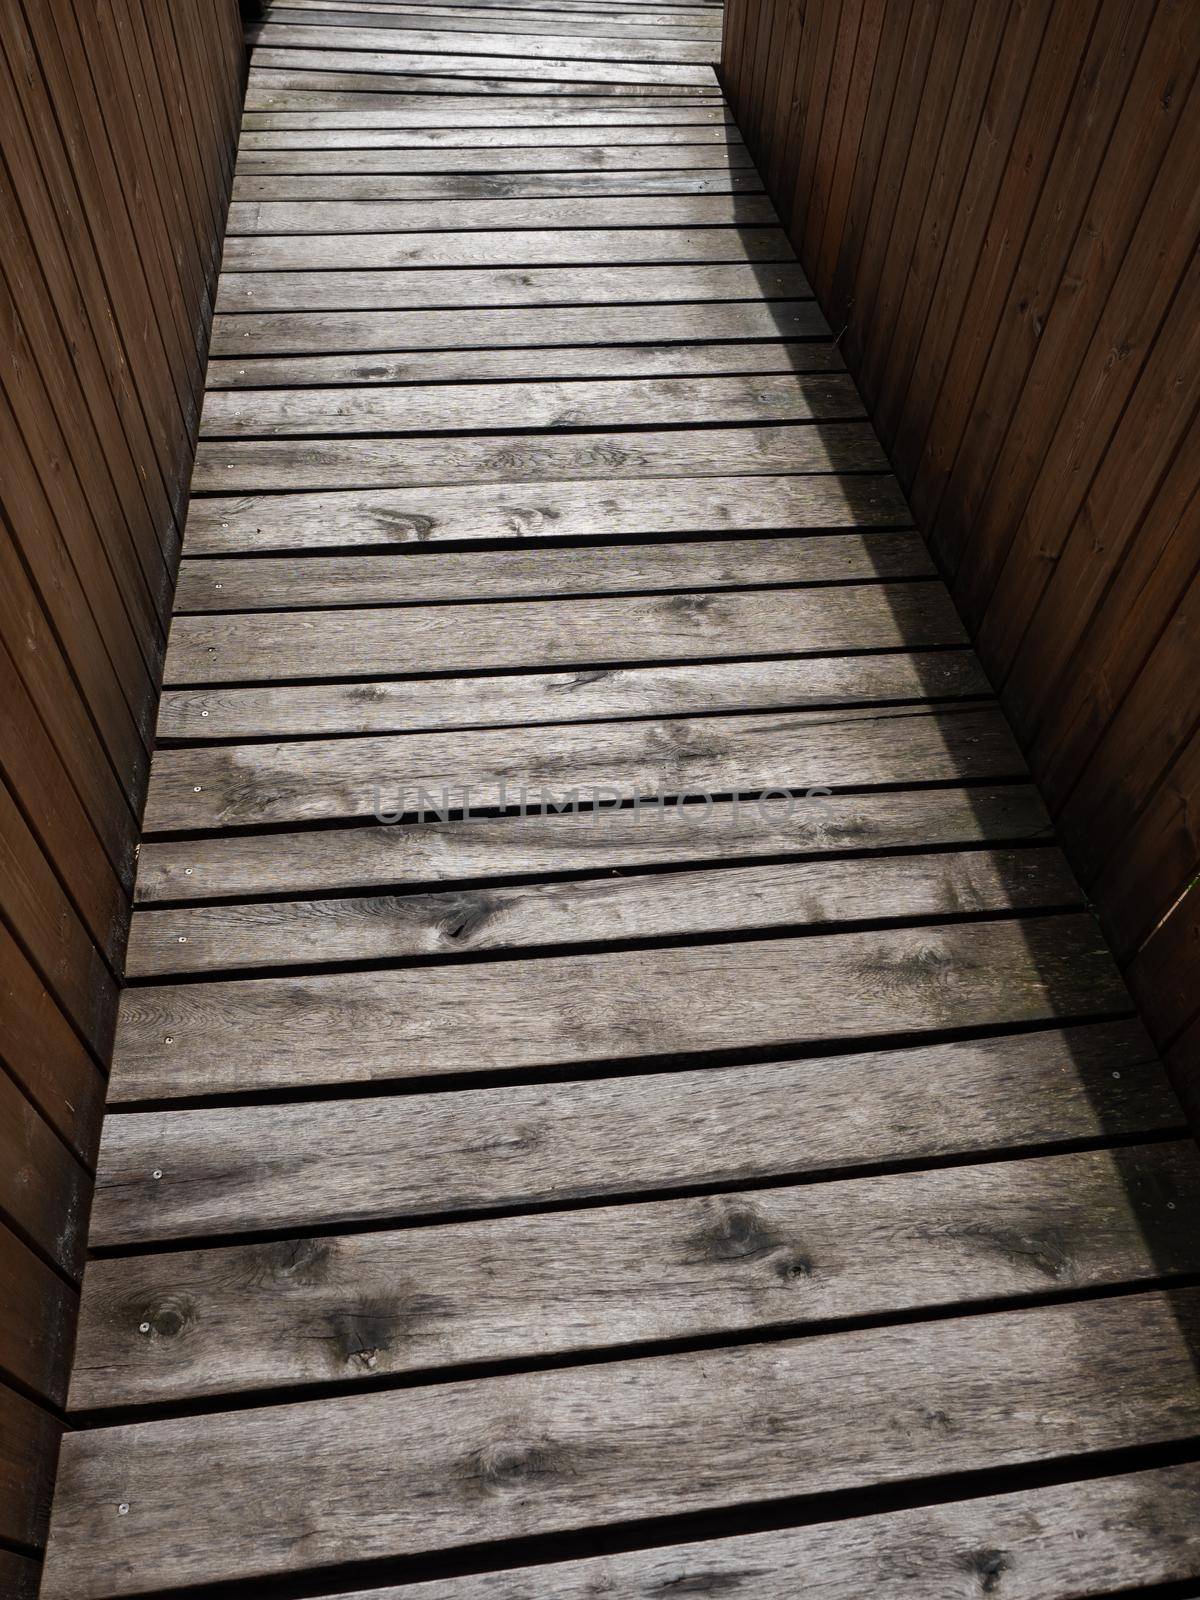 Wet wooden planks of path for wheelchairs, another castle entrance. Barrier free path for visitors.